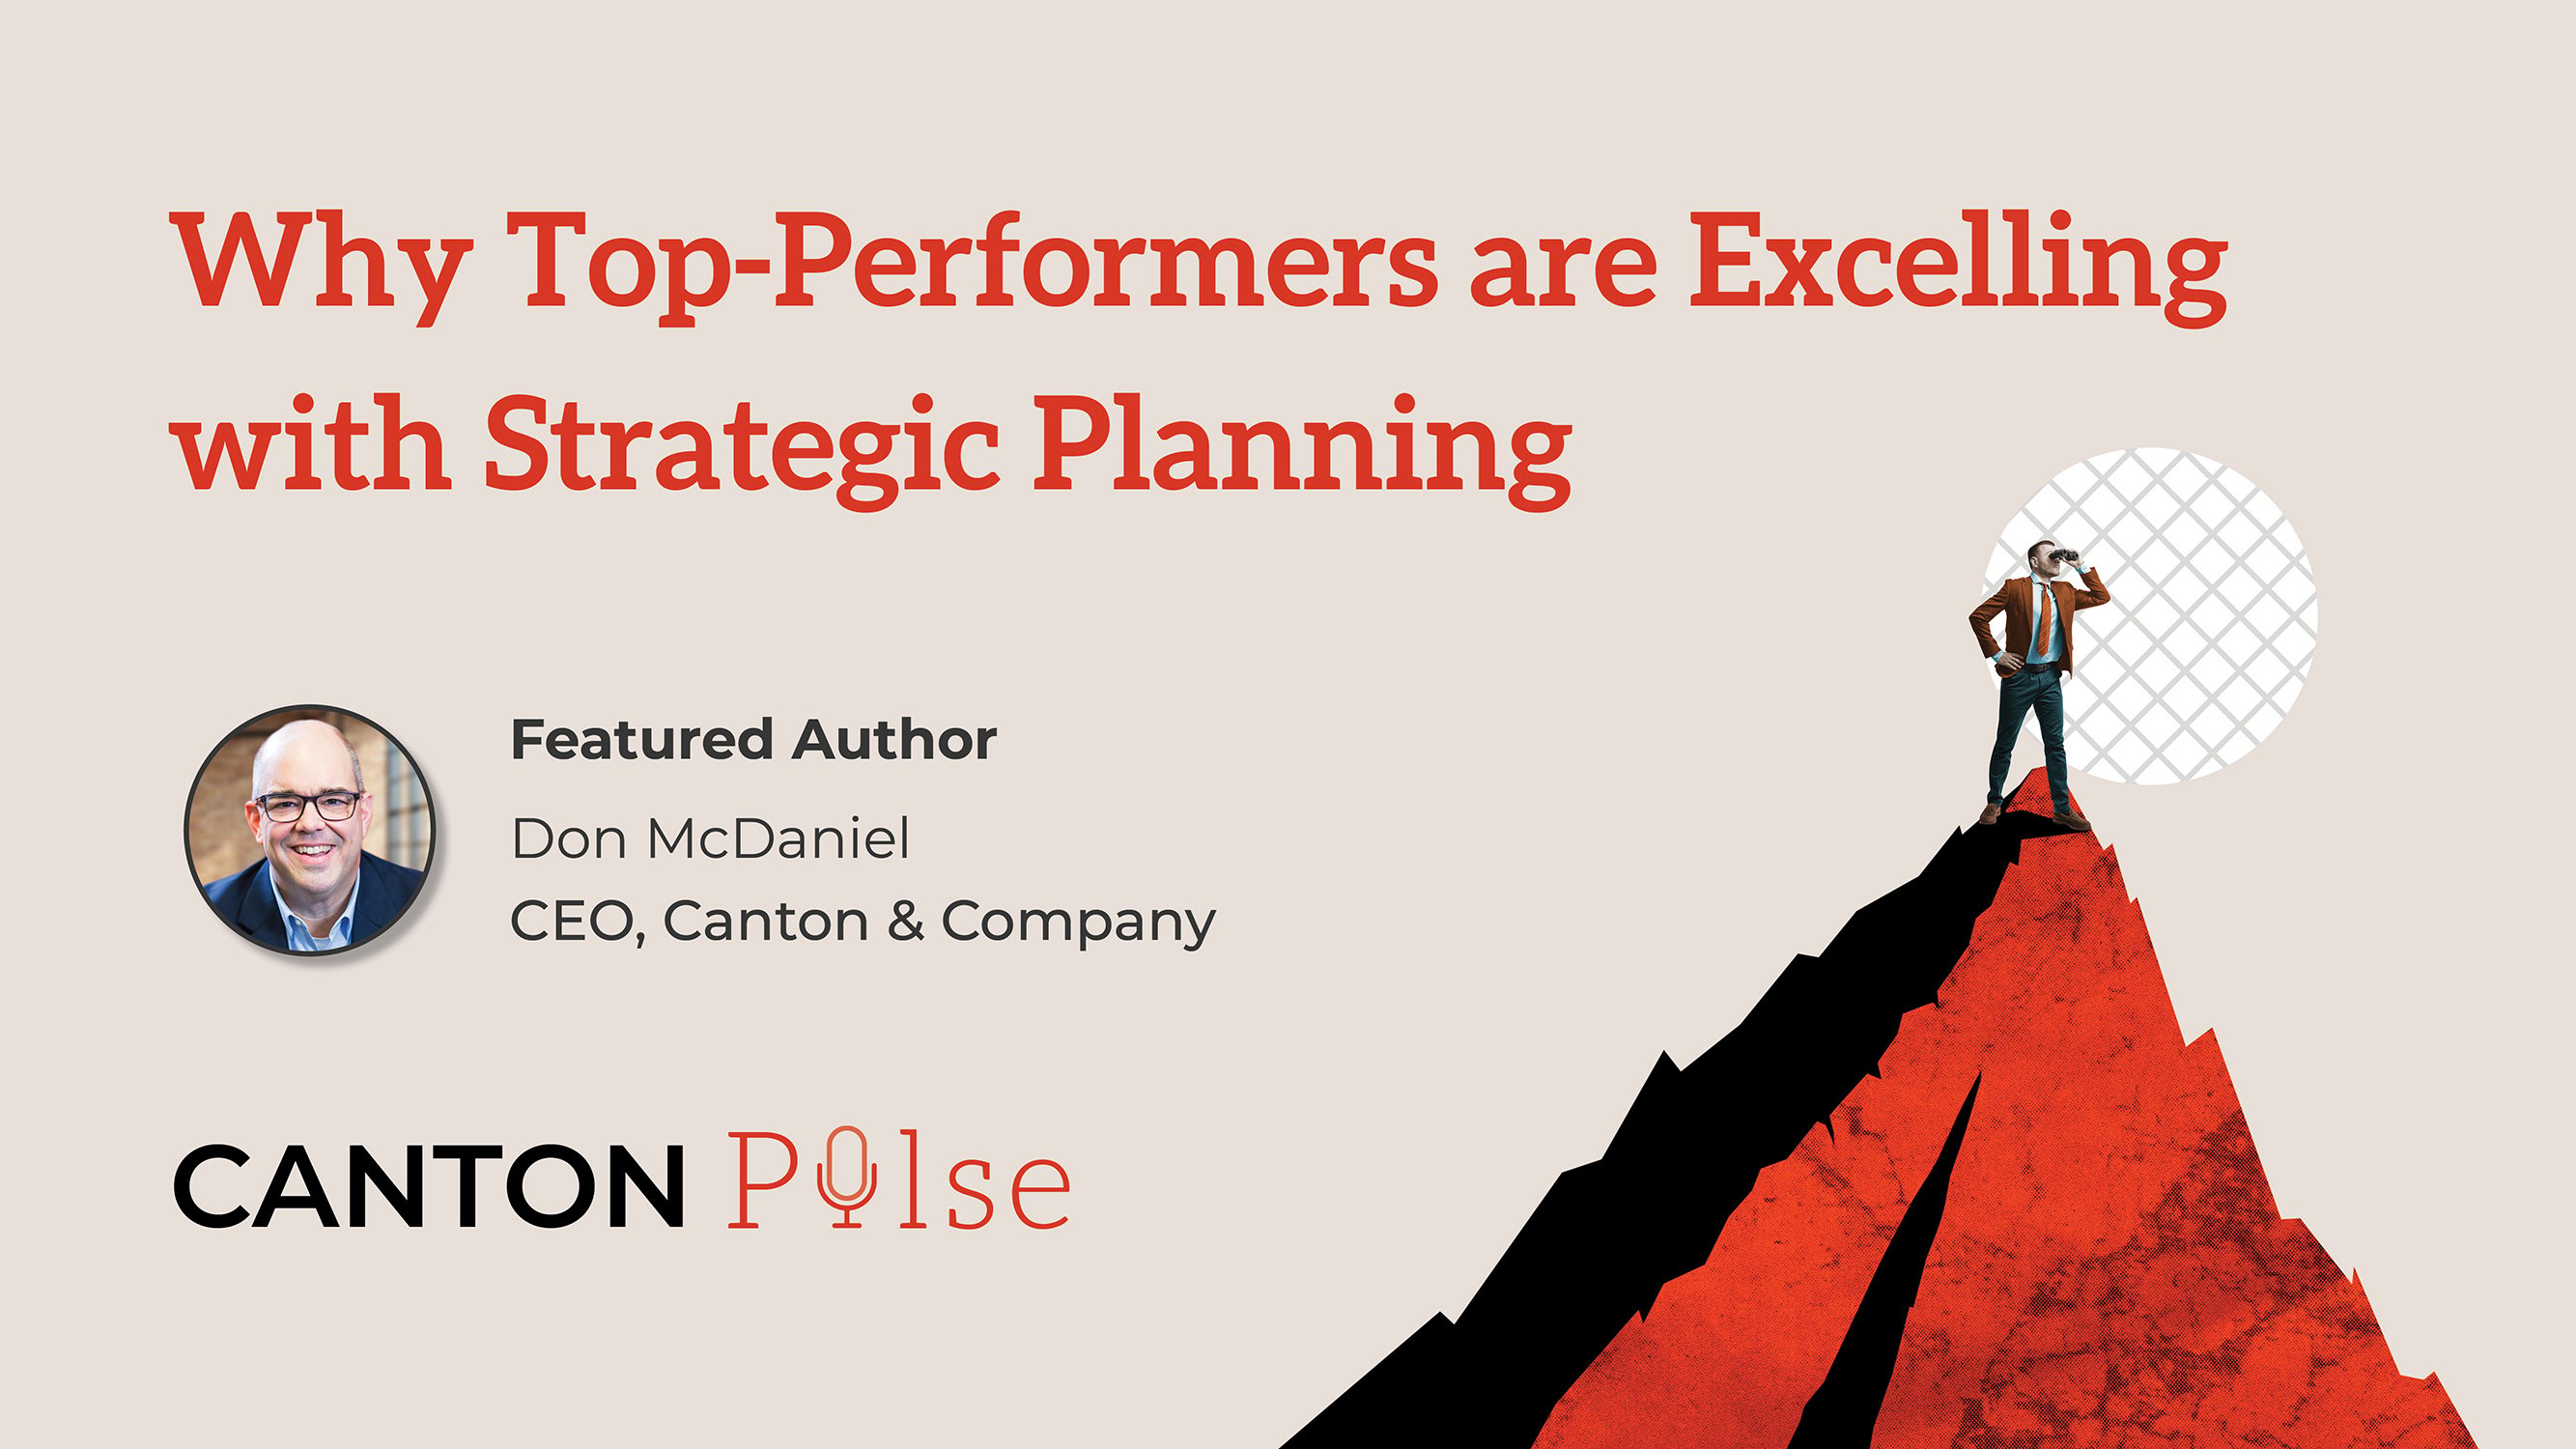 Why Top-Performers are Excelling with Strategic Planning by Don McDaniel, CEO of Canton & Company